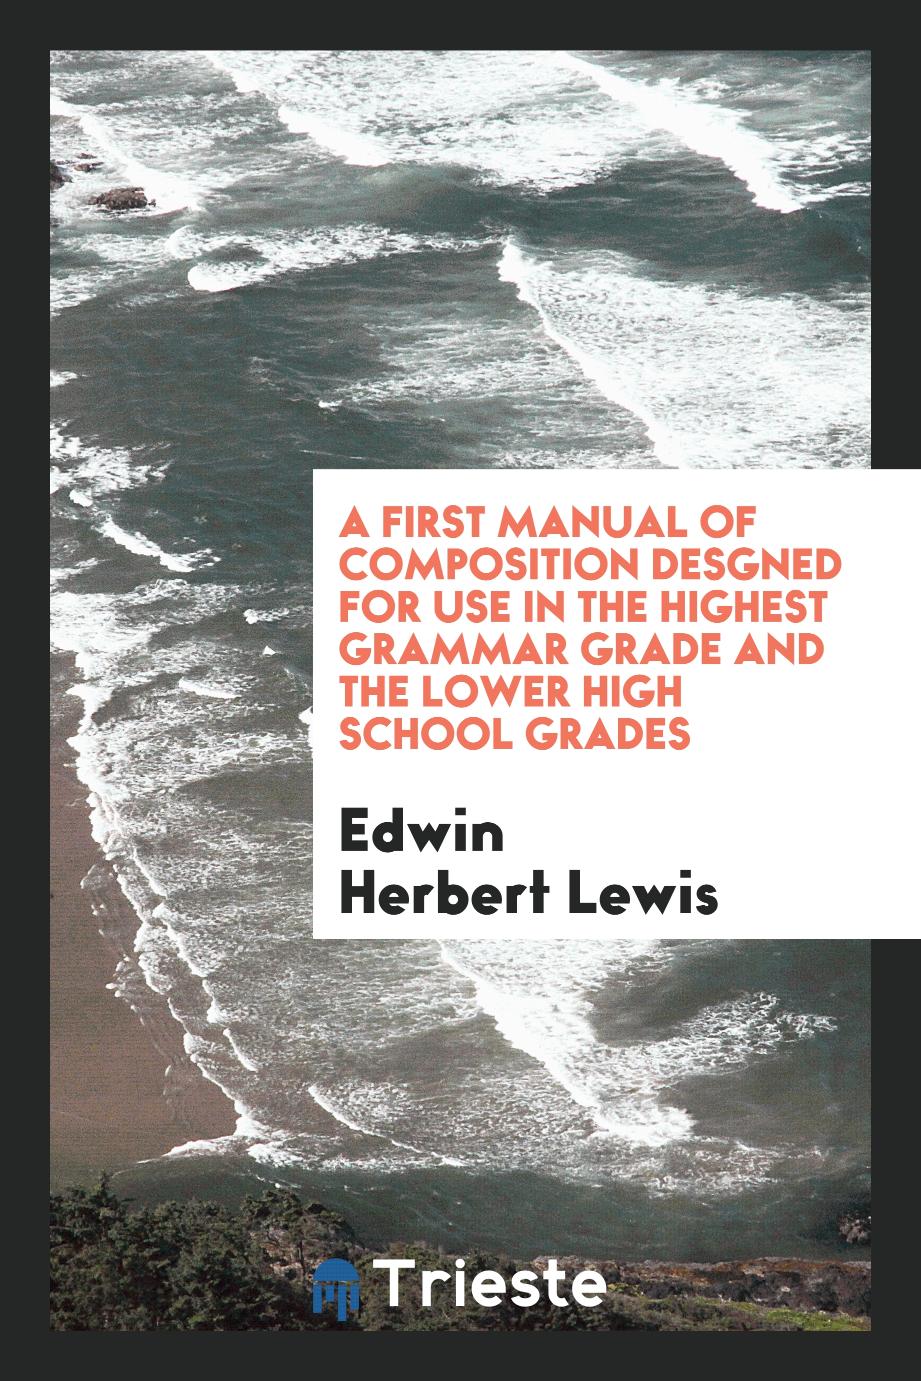 A First Manual of Composition Desgned for Use in the Highest Grammar Grade and the Lower High School Grades